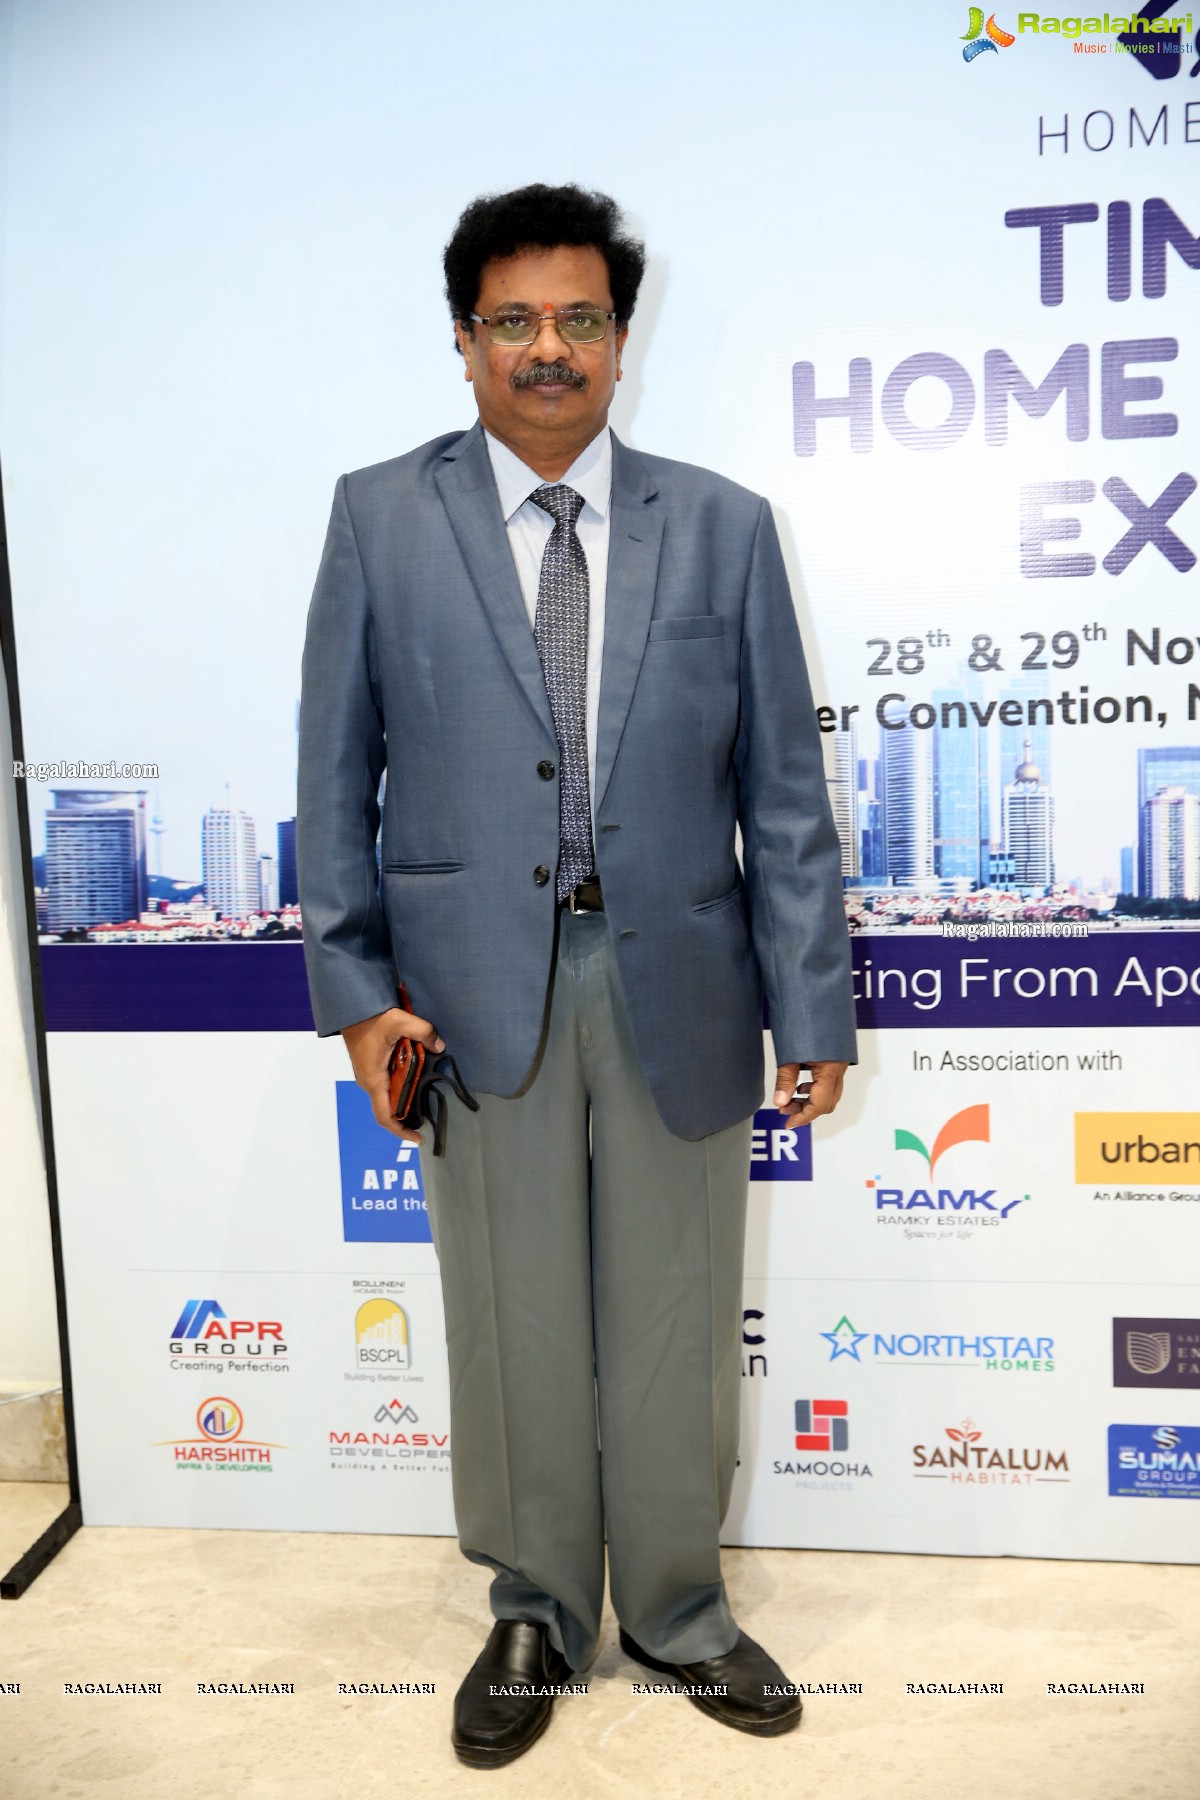 Times Home Hunt Expo at Cyber Conventions